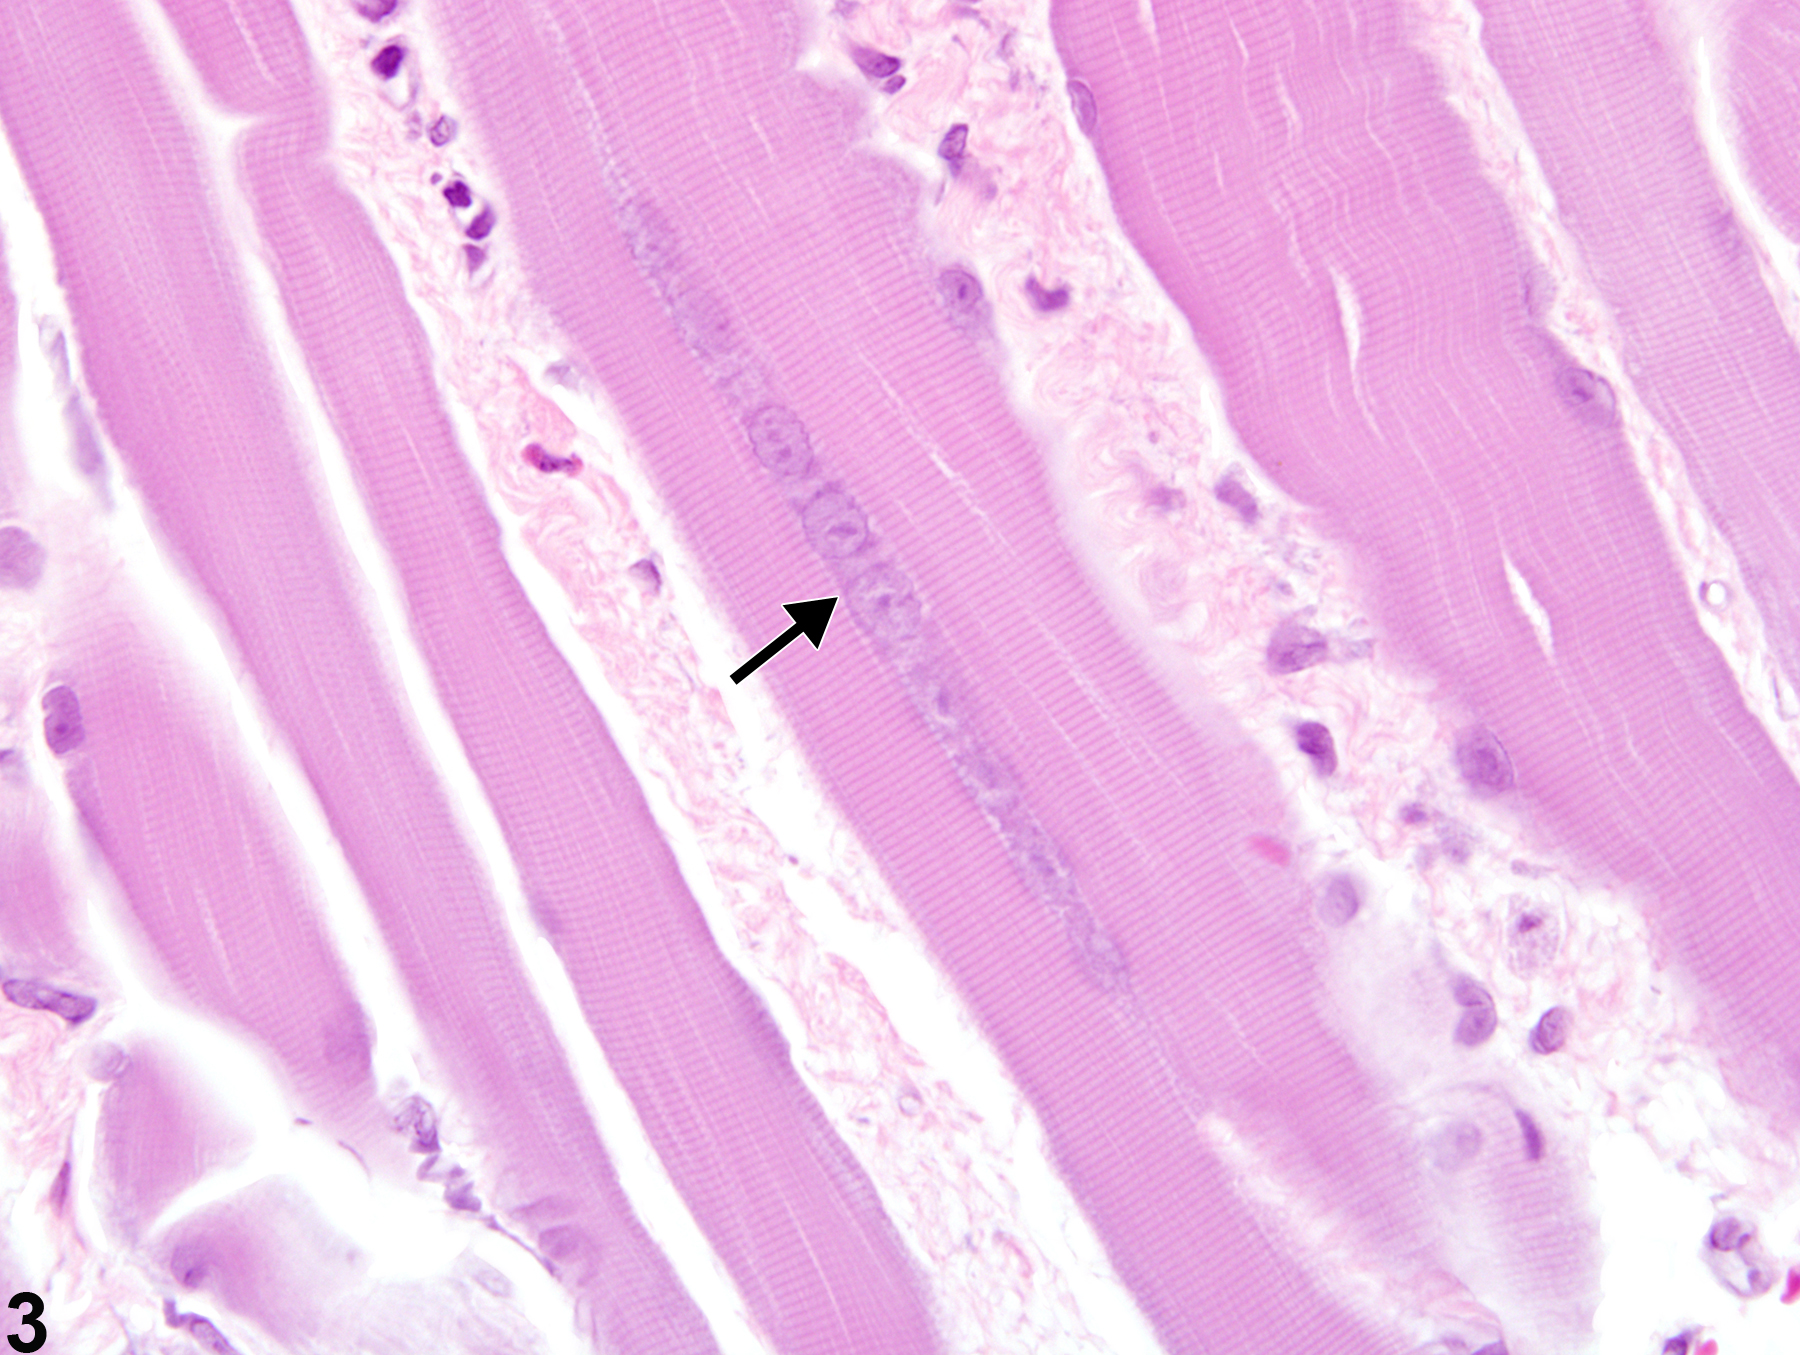 Image of regeneration in the skeletal muscle from a male Harlan Sprague-Dawley rat in a subchronic study